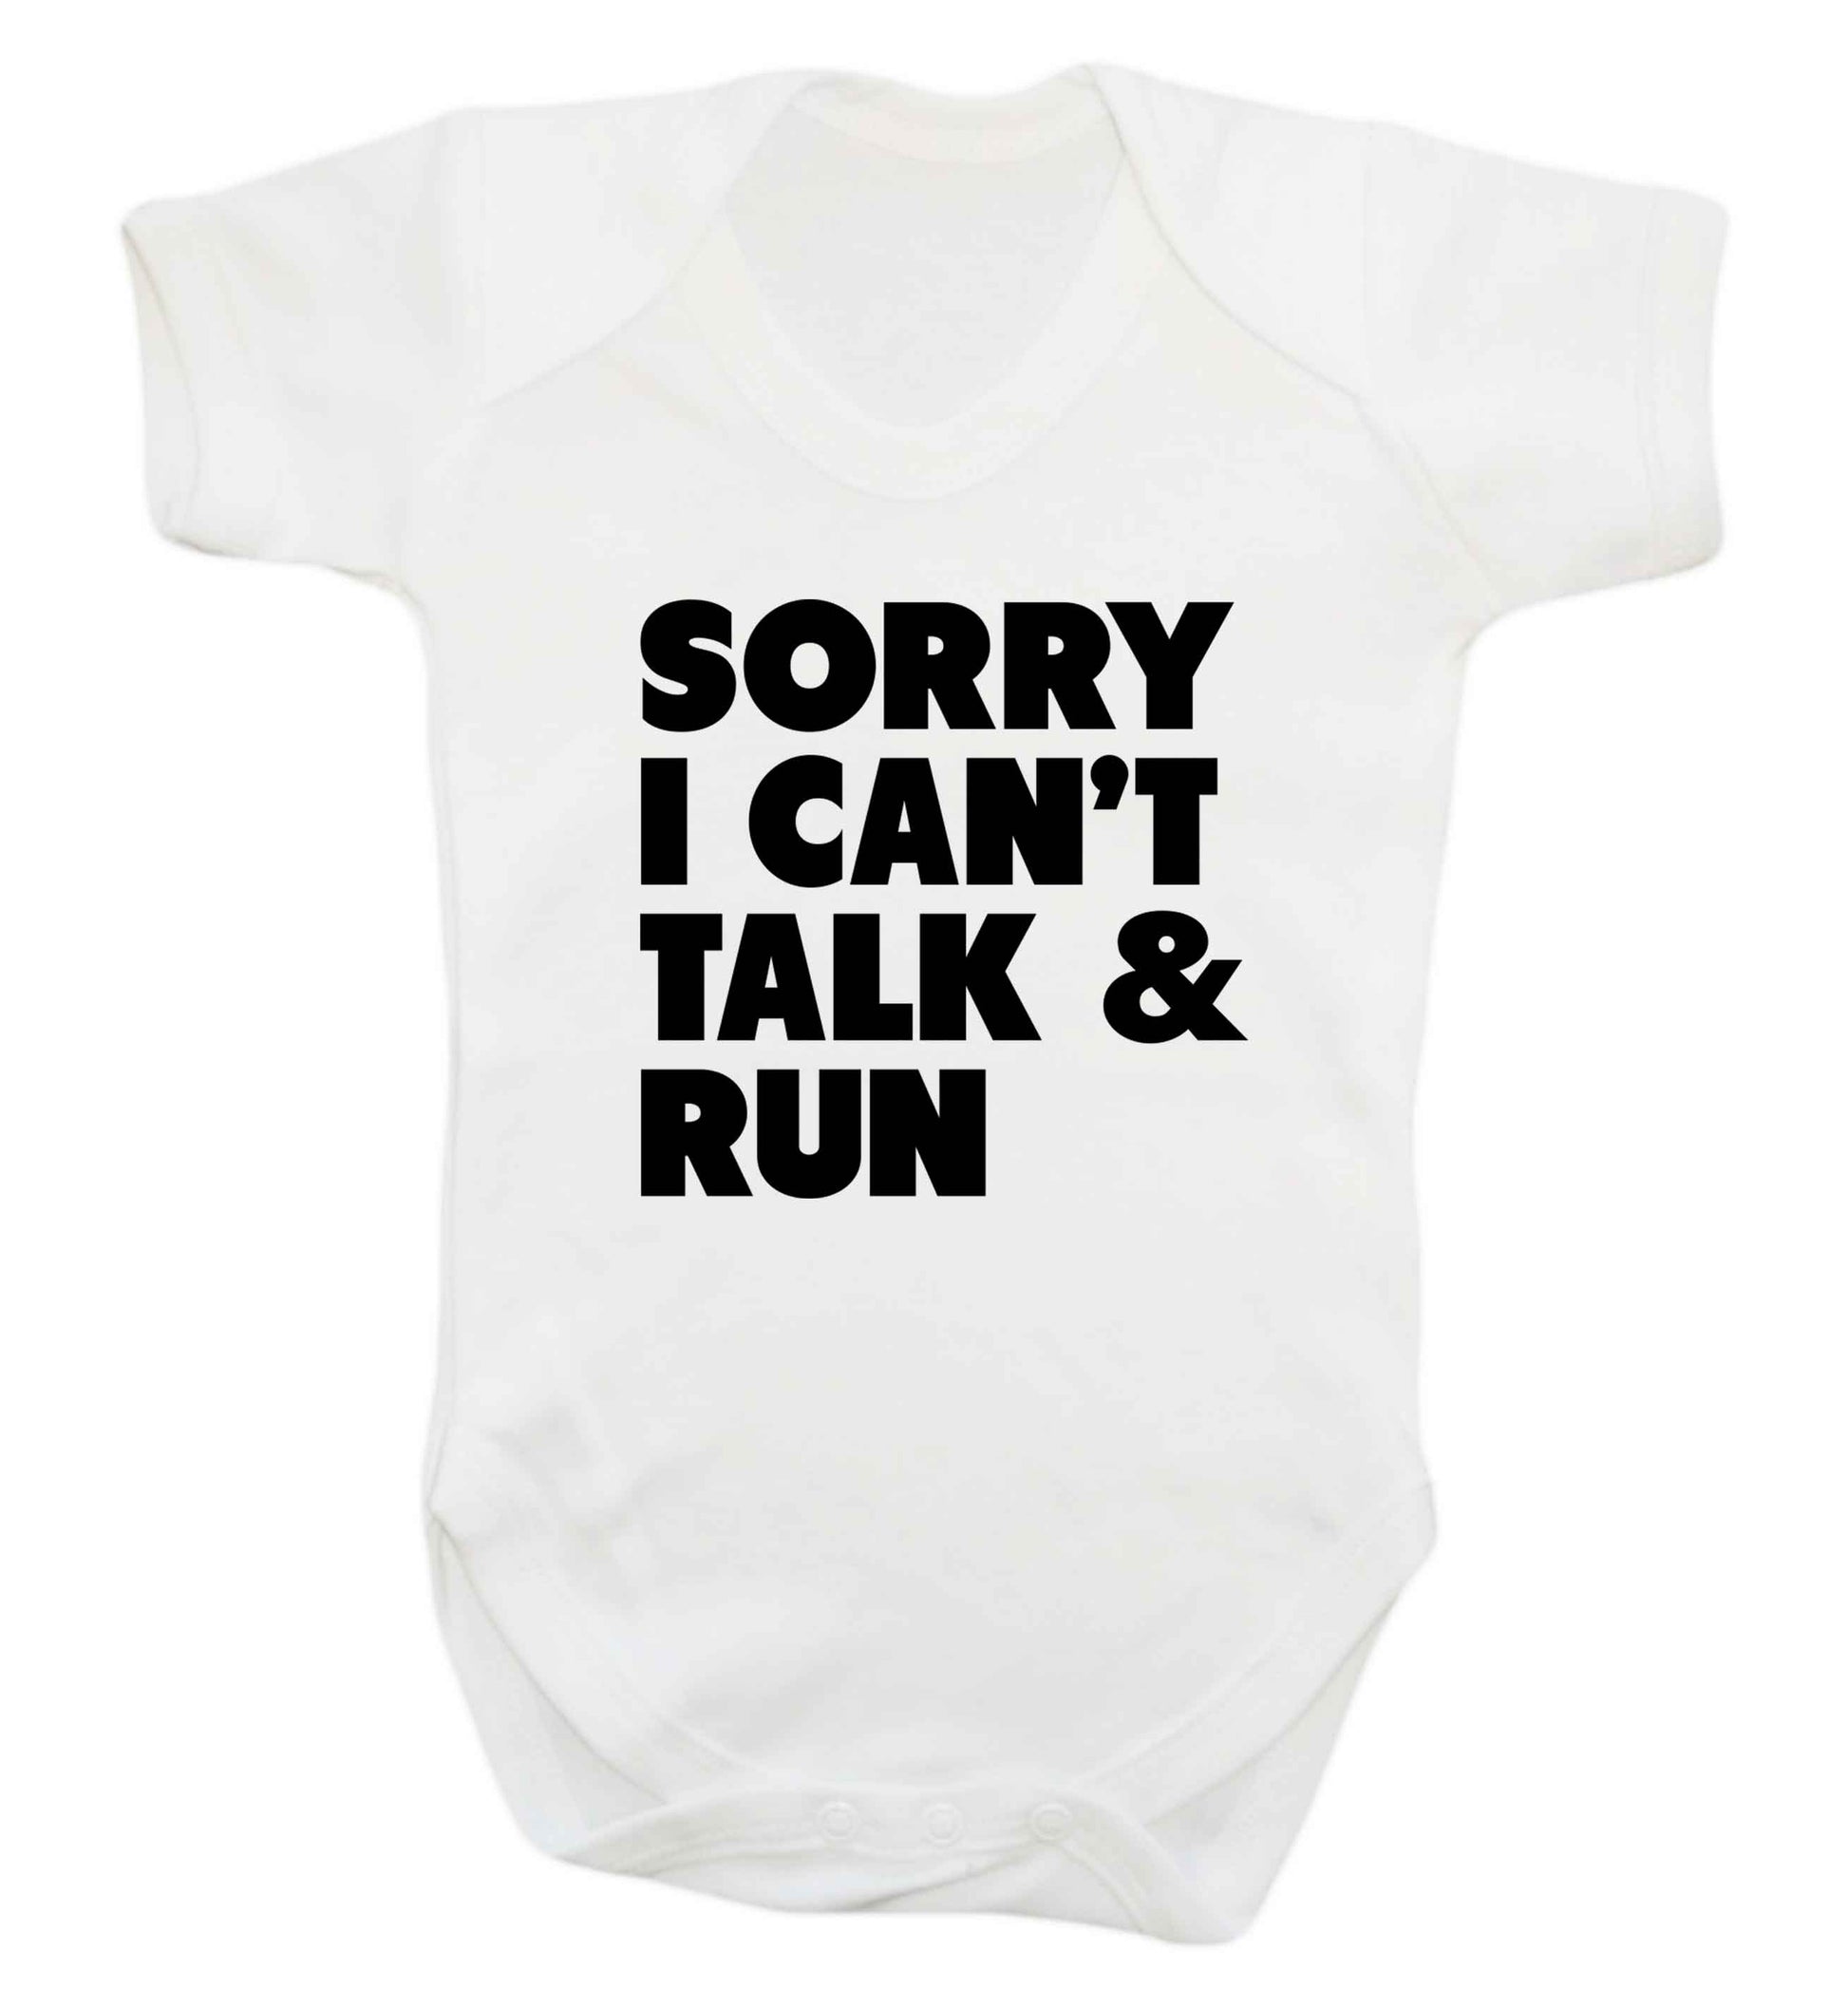 Sorry I can't talk and run baby vest white 18-24 months